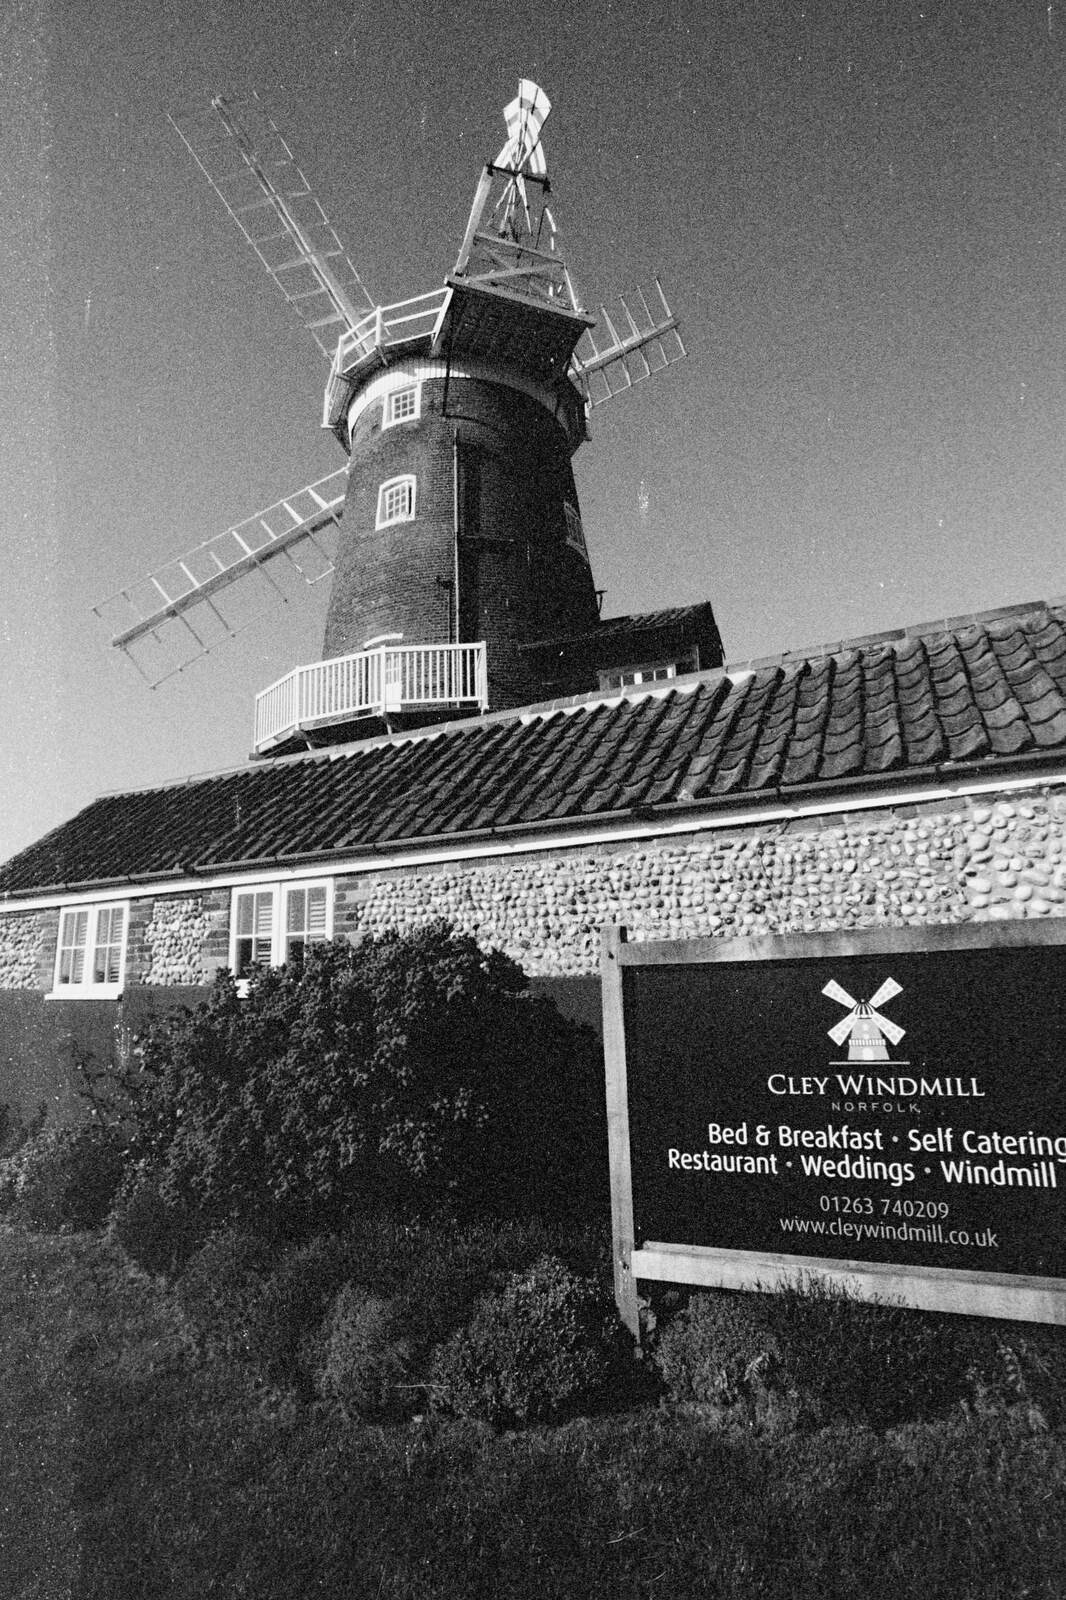 Cley windmill in black and white from The BSCC at Needham, and a Birthday By The Sea, Cley, Norfolk - 26th May 2012